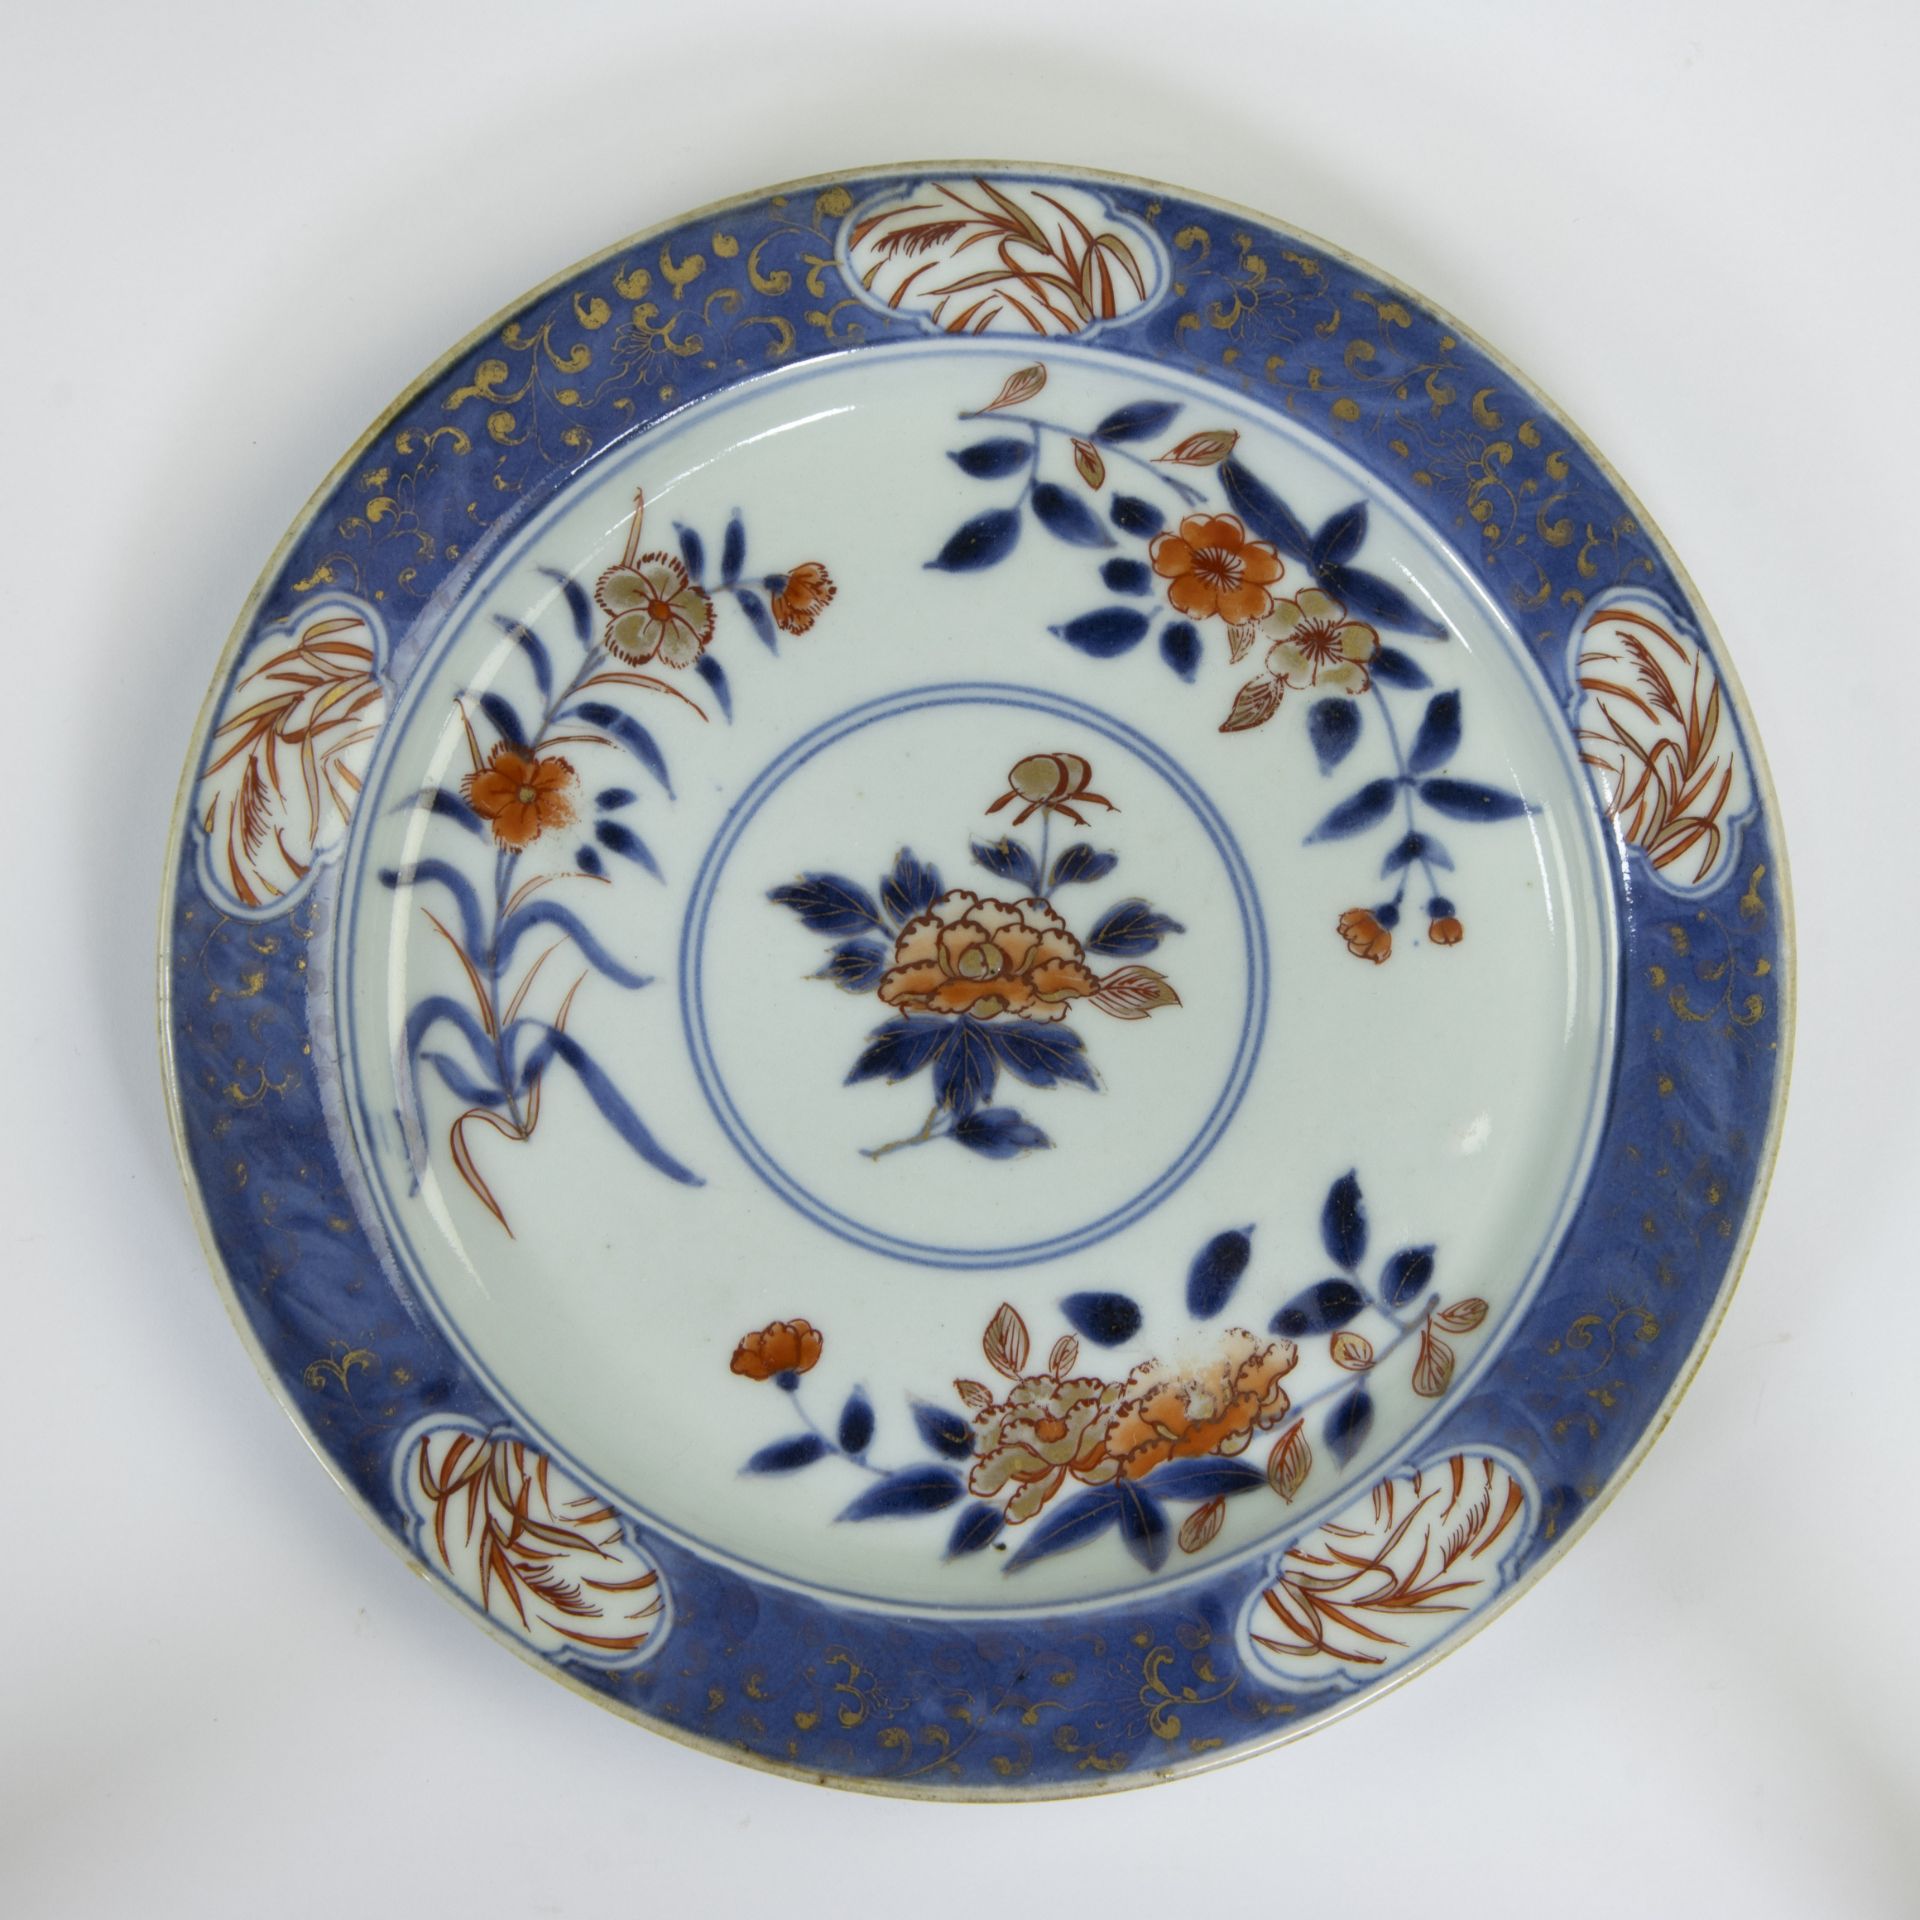 2 Chinese Imari plates and 4 blue and white plates, 18th century - Image 2 of 13